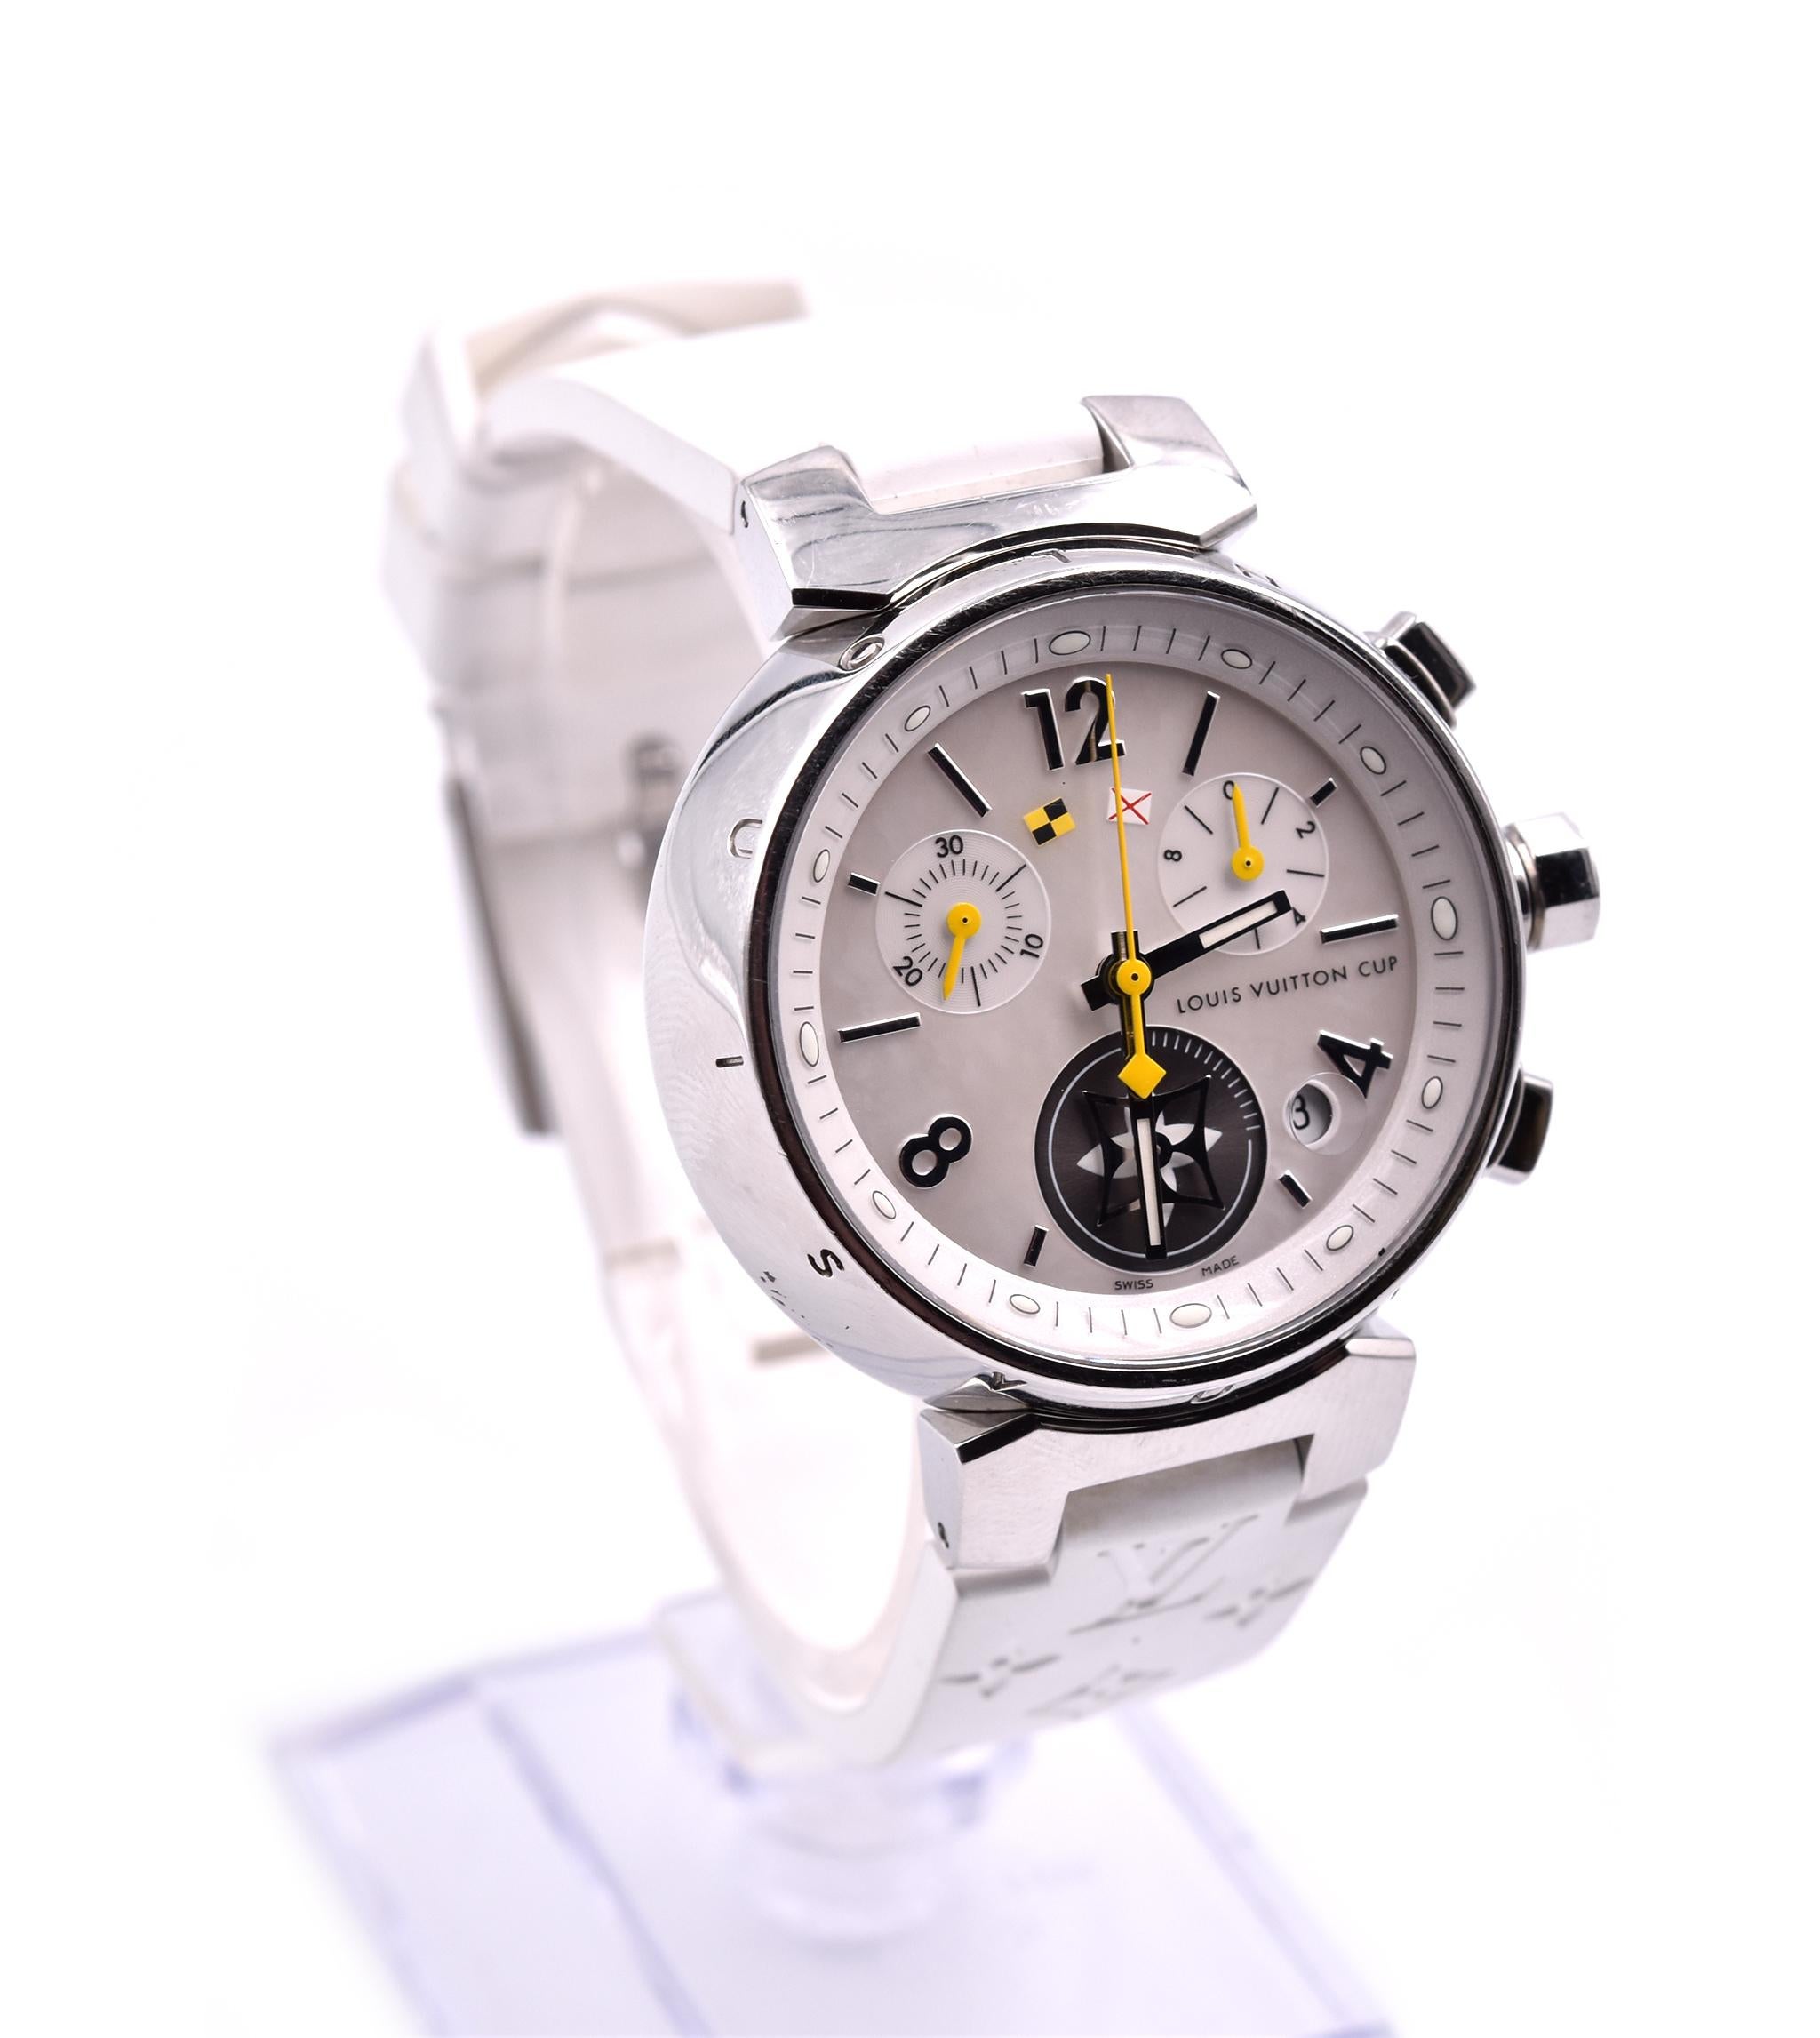 Movement: quartz
Function: hours, minutes, date, chronograph
Case: 34mm round stainless steel case
Dial: white mother of pearl, Arabic numerals, yellow monogram-shaped seconds hand
Band: white rubber strap embossed with Louis Vuitton monogram